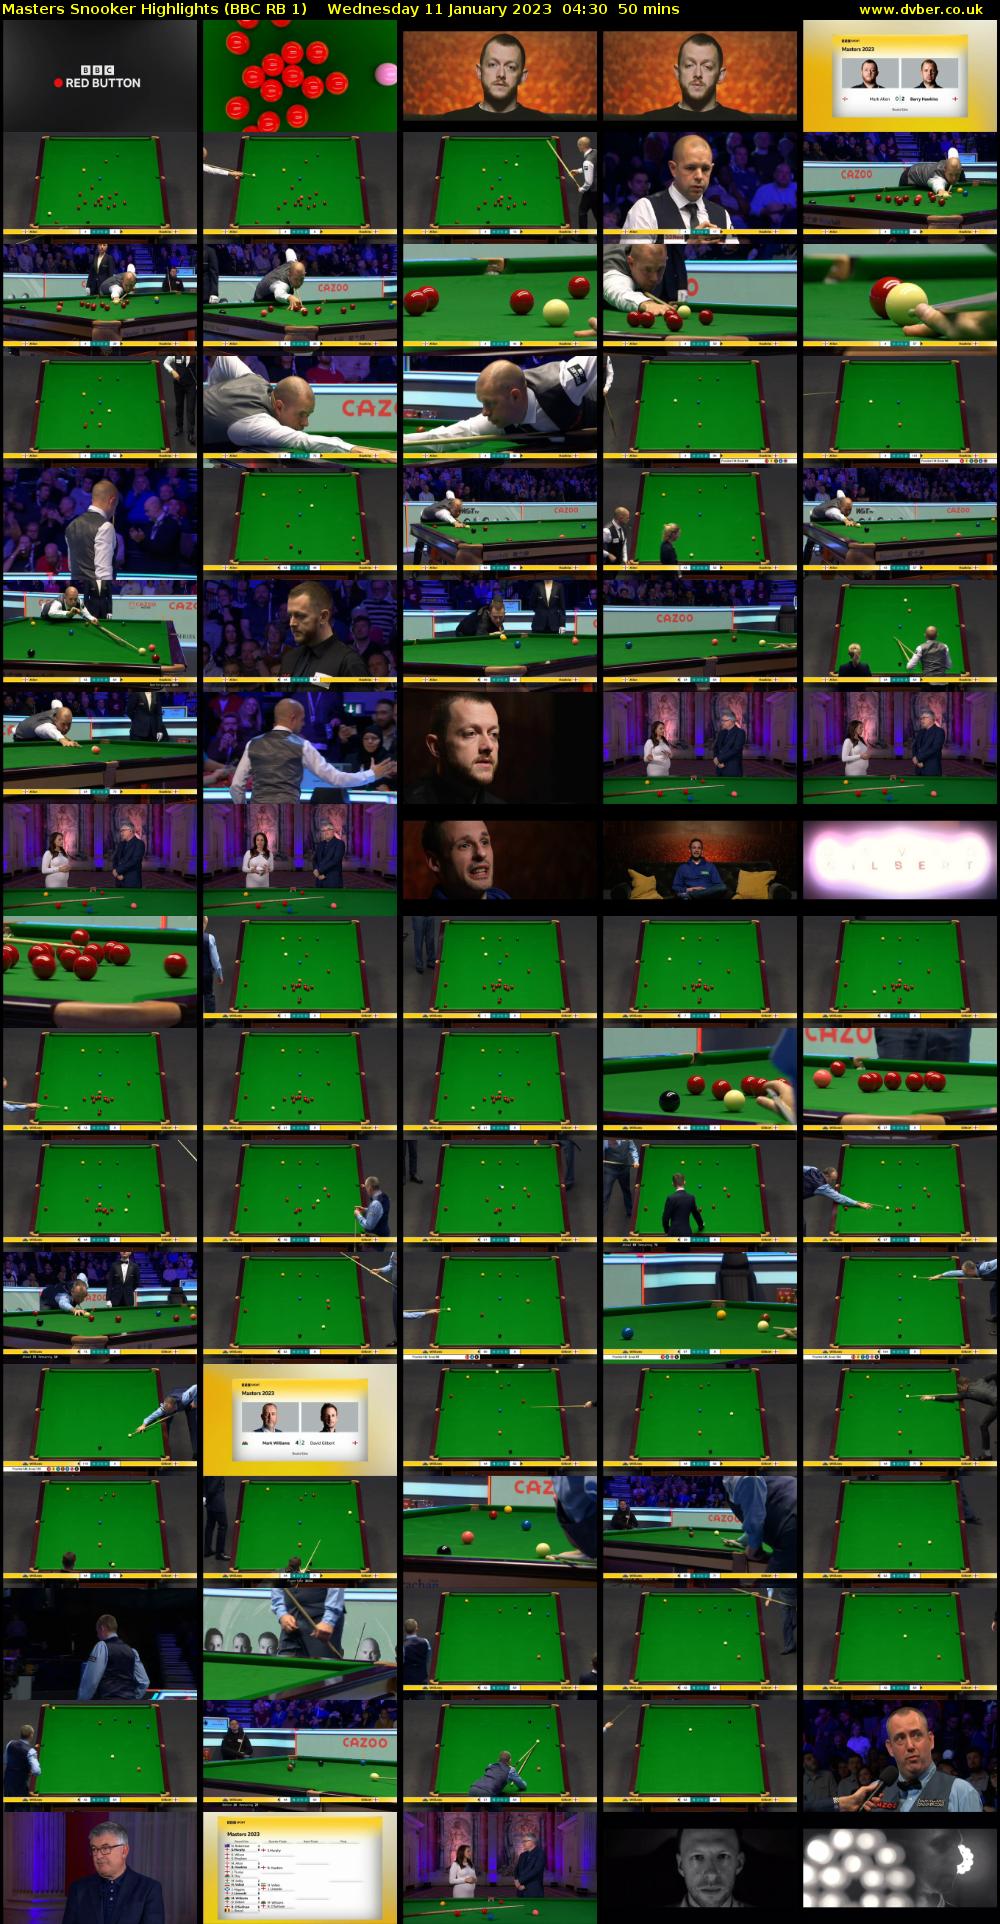 Masters Snooker Highlights (BBC RB 1) Wednesday 11 January 2023 04:30 - 05:20